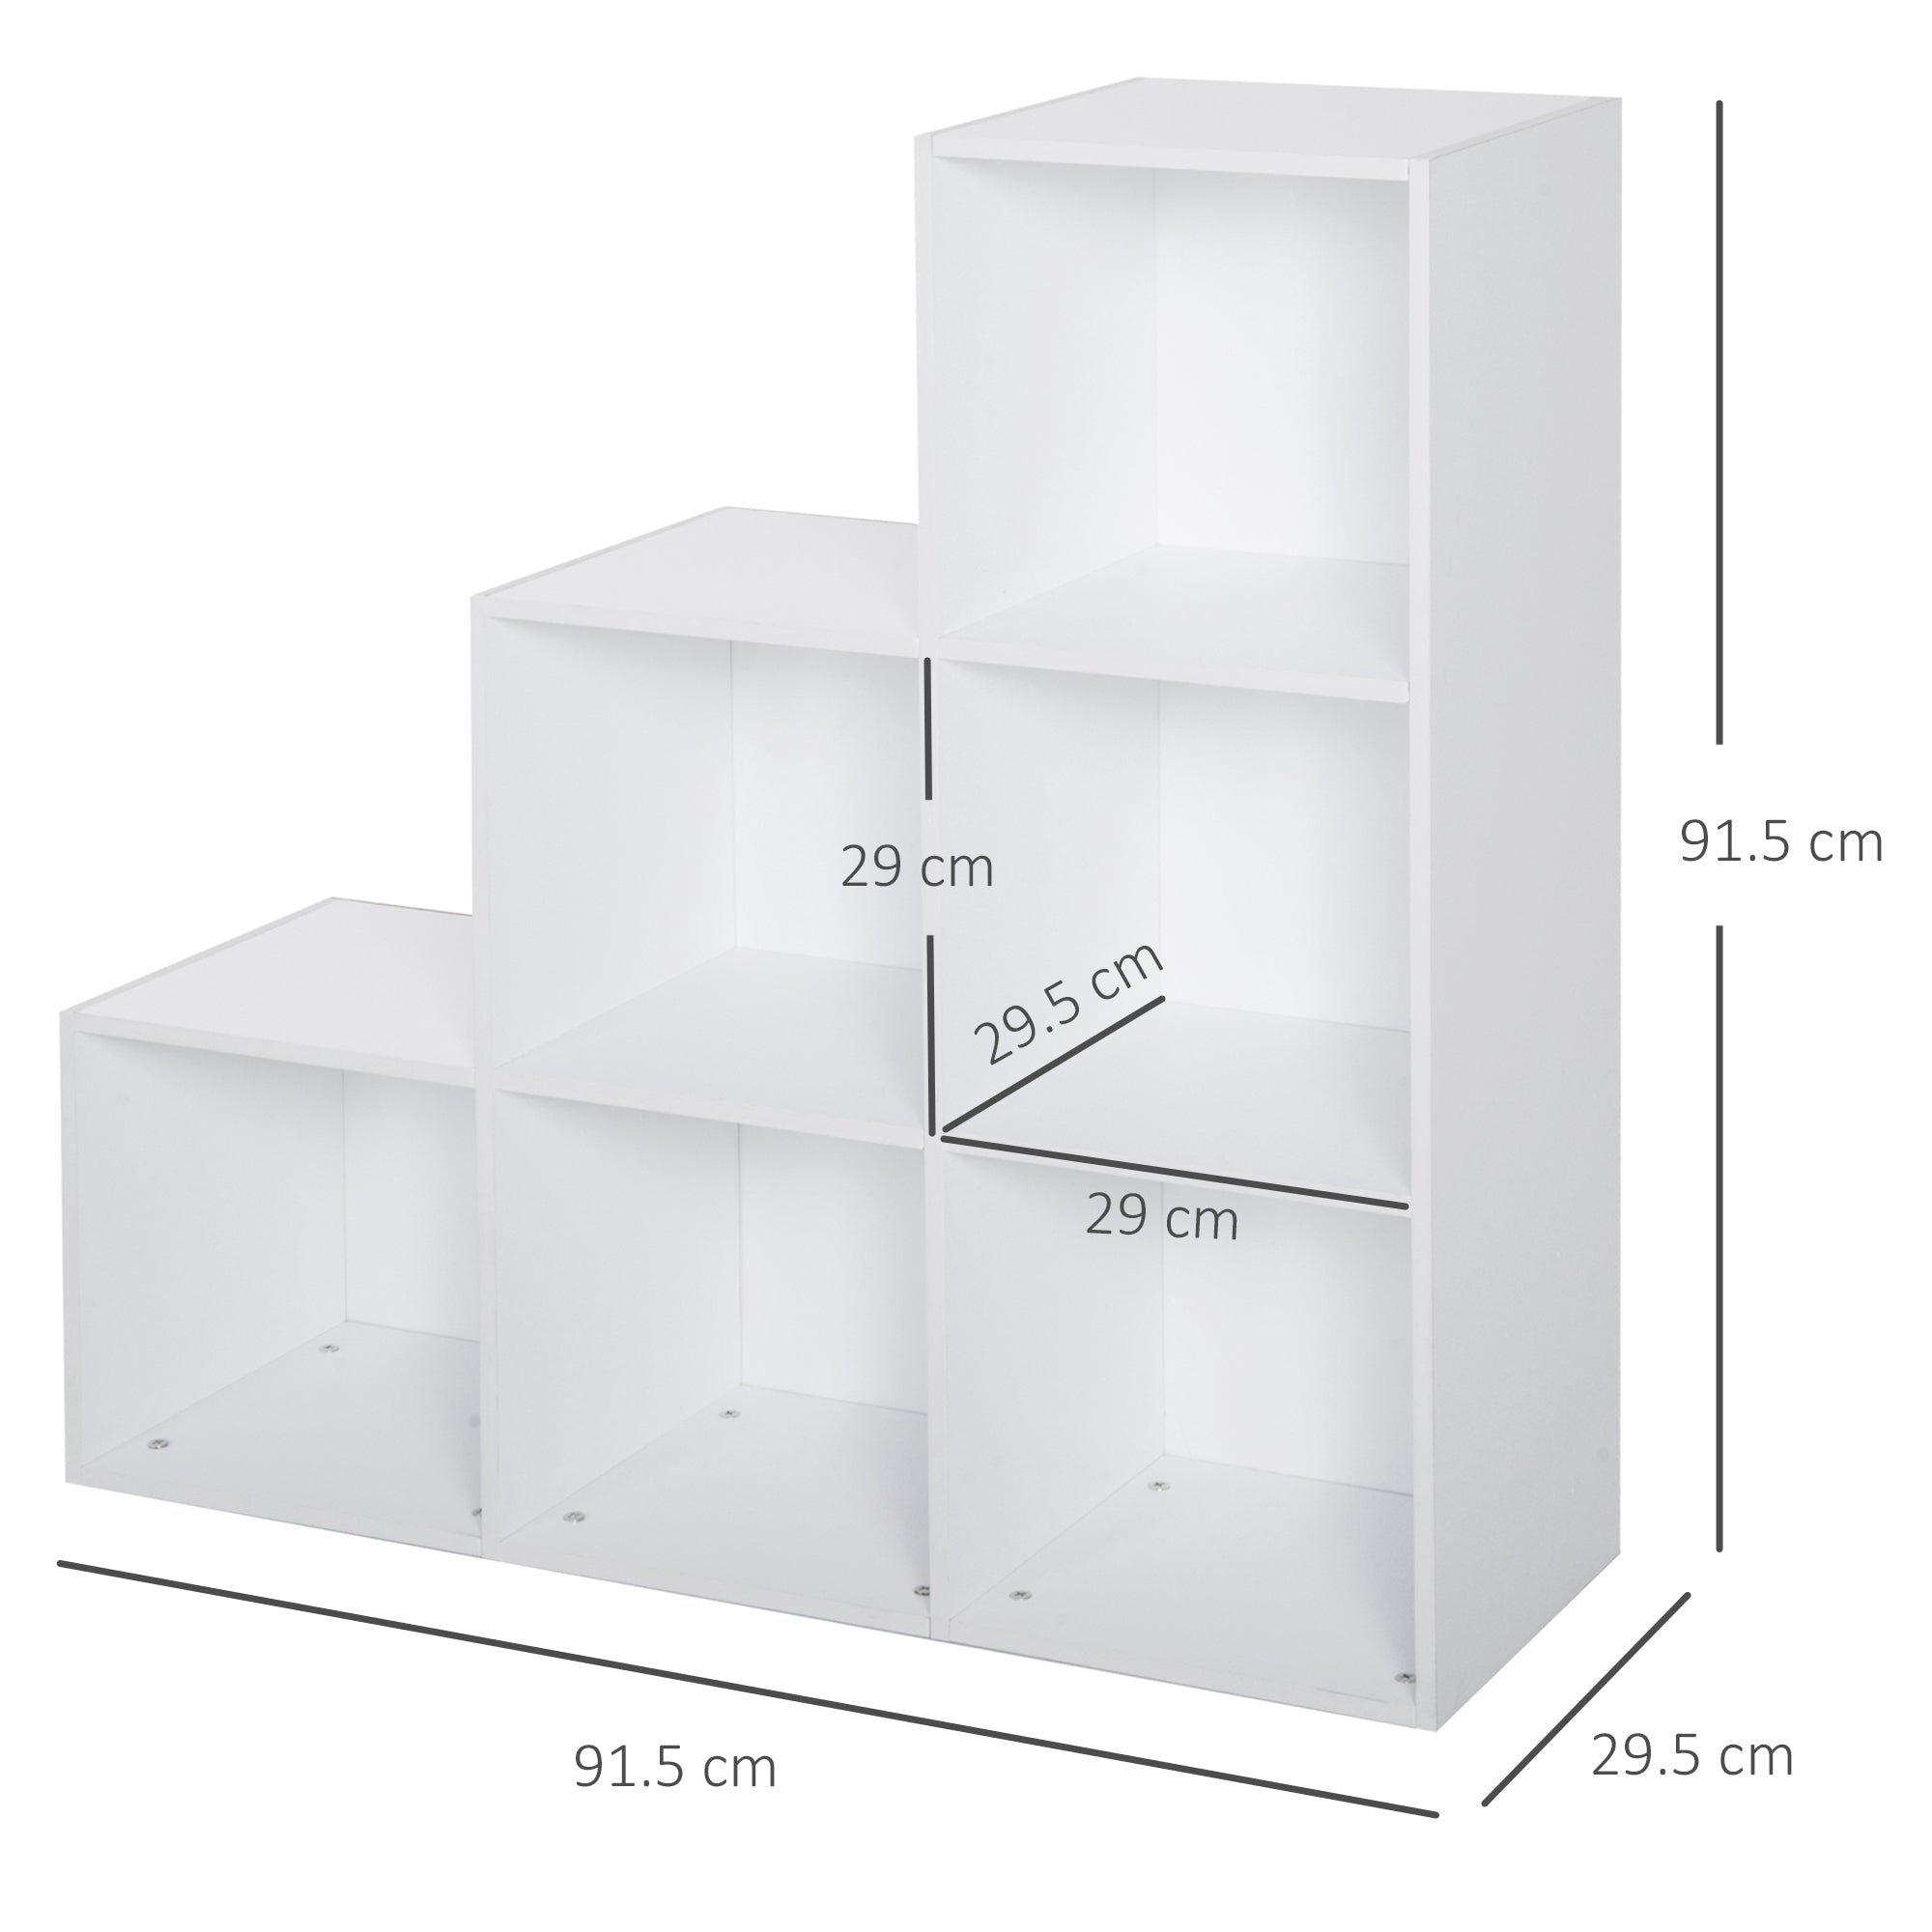 HOMCOM 3-tier Step 6 Cubes Storage Unit Particle Board Cabinet Bookcase Organiser Home Office Shelves - White - Inspirely